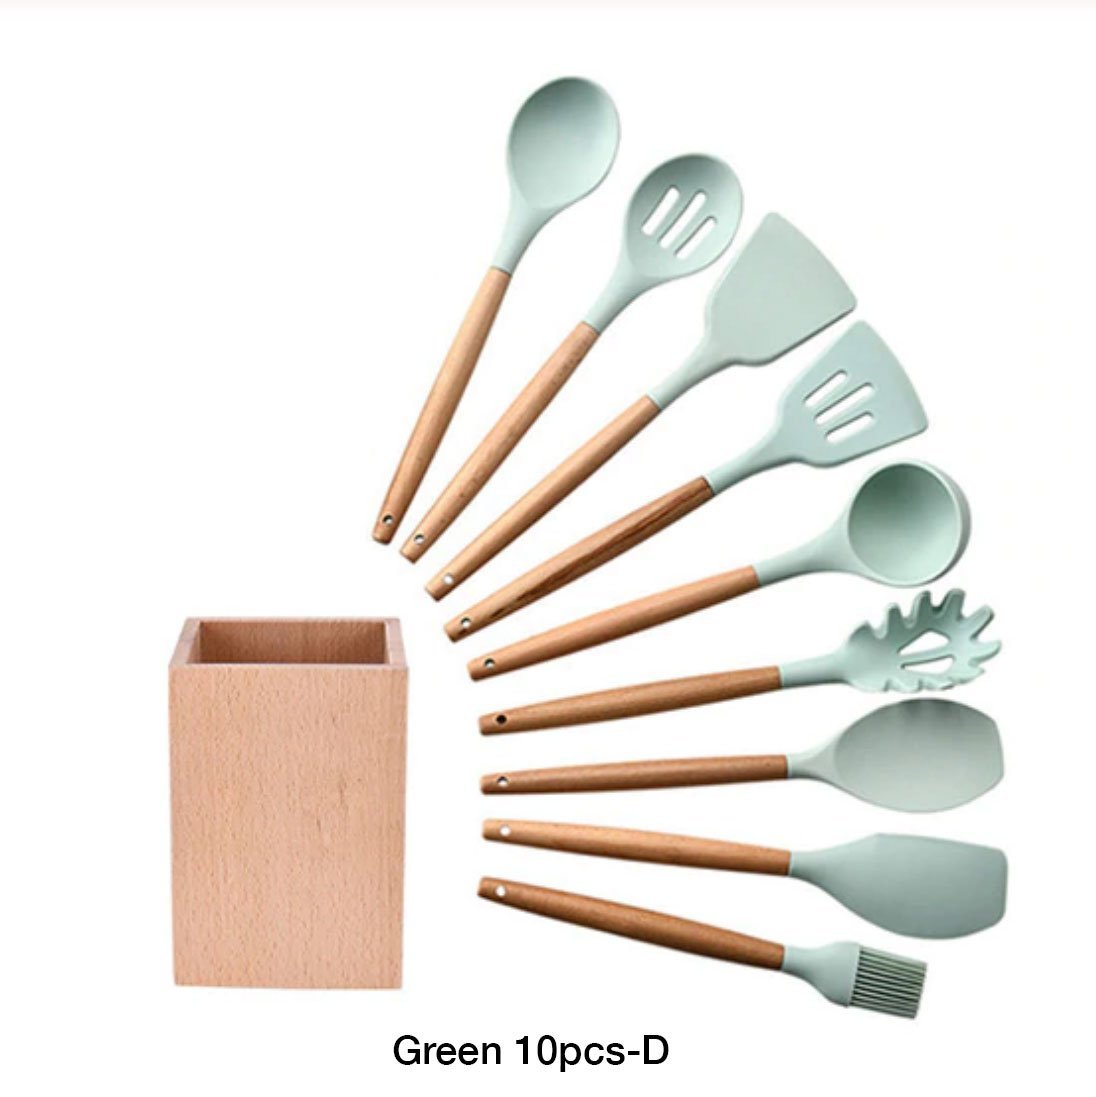 Silicon Utensil Sets - Nordic Side - 